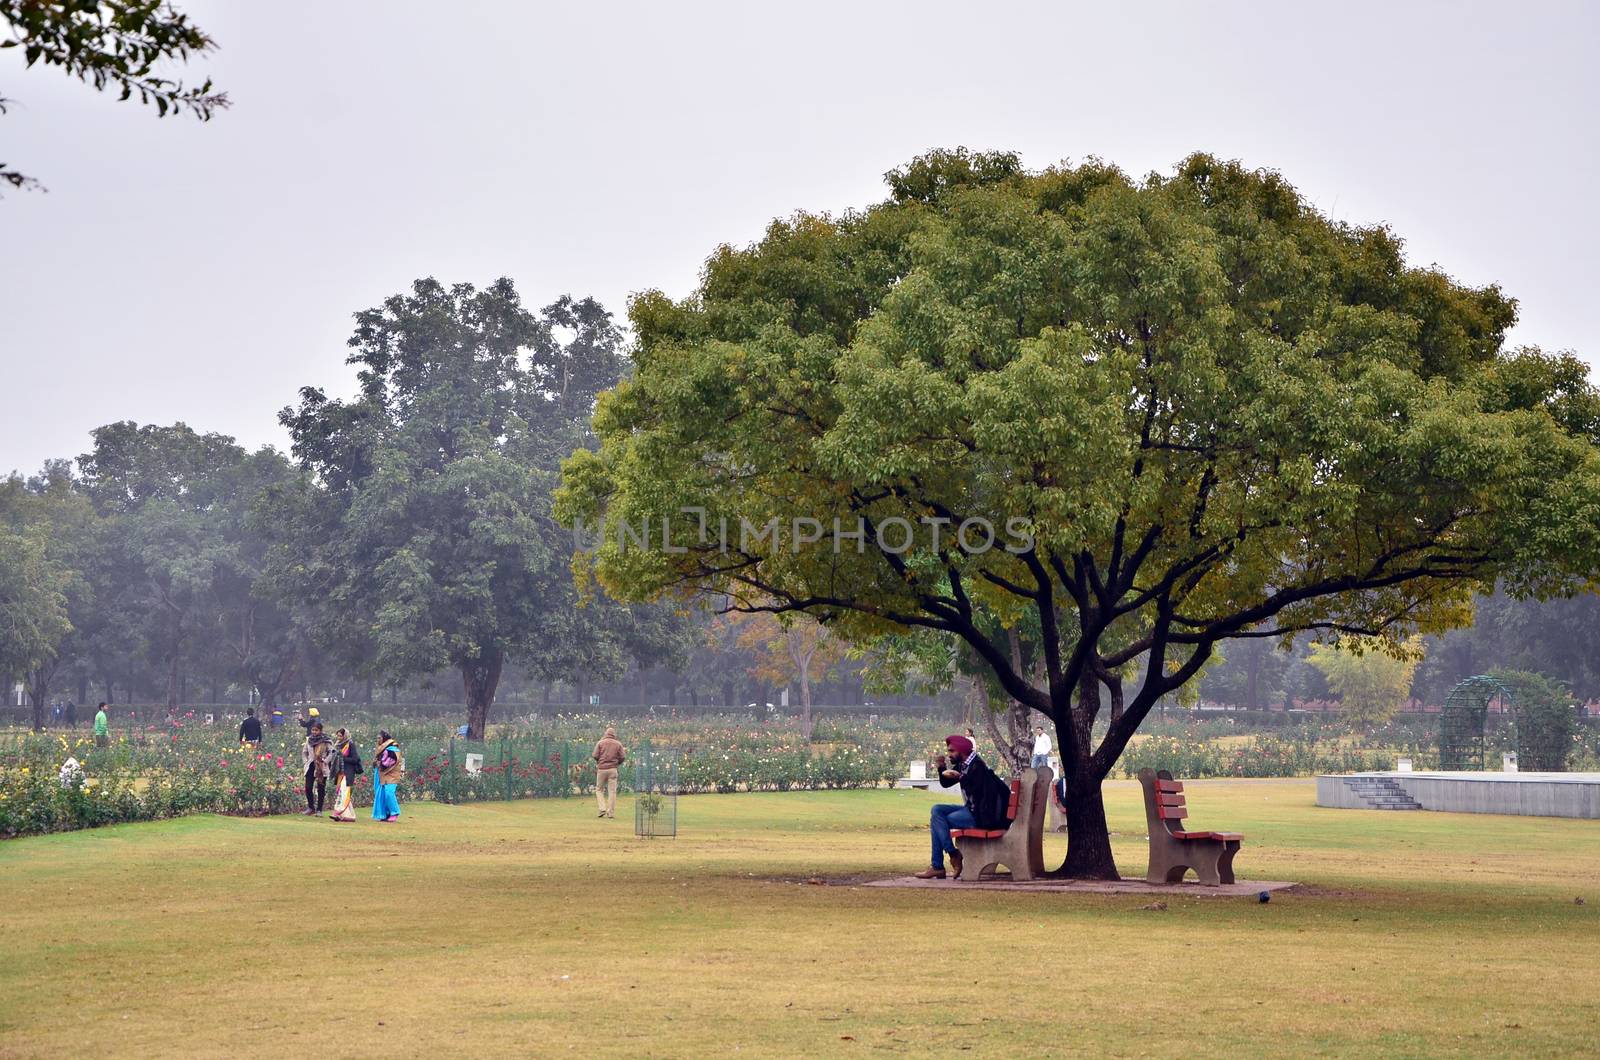 Chandigarh, India - January 4, 2015: Tourist visit Zakir Hussain Rose Garden on January 4, 2015 in Chandigarh, India. Zakir Hussain Rose Garden, is a botanical garden with 50,000 rose-bushes of 1600 different species.